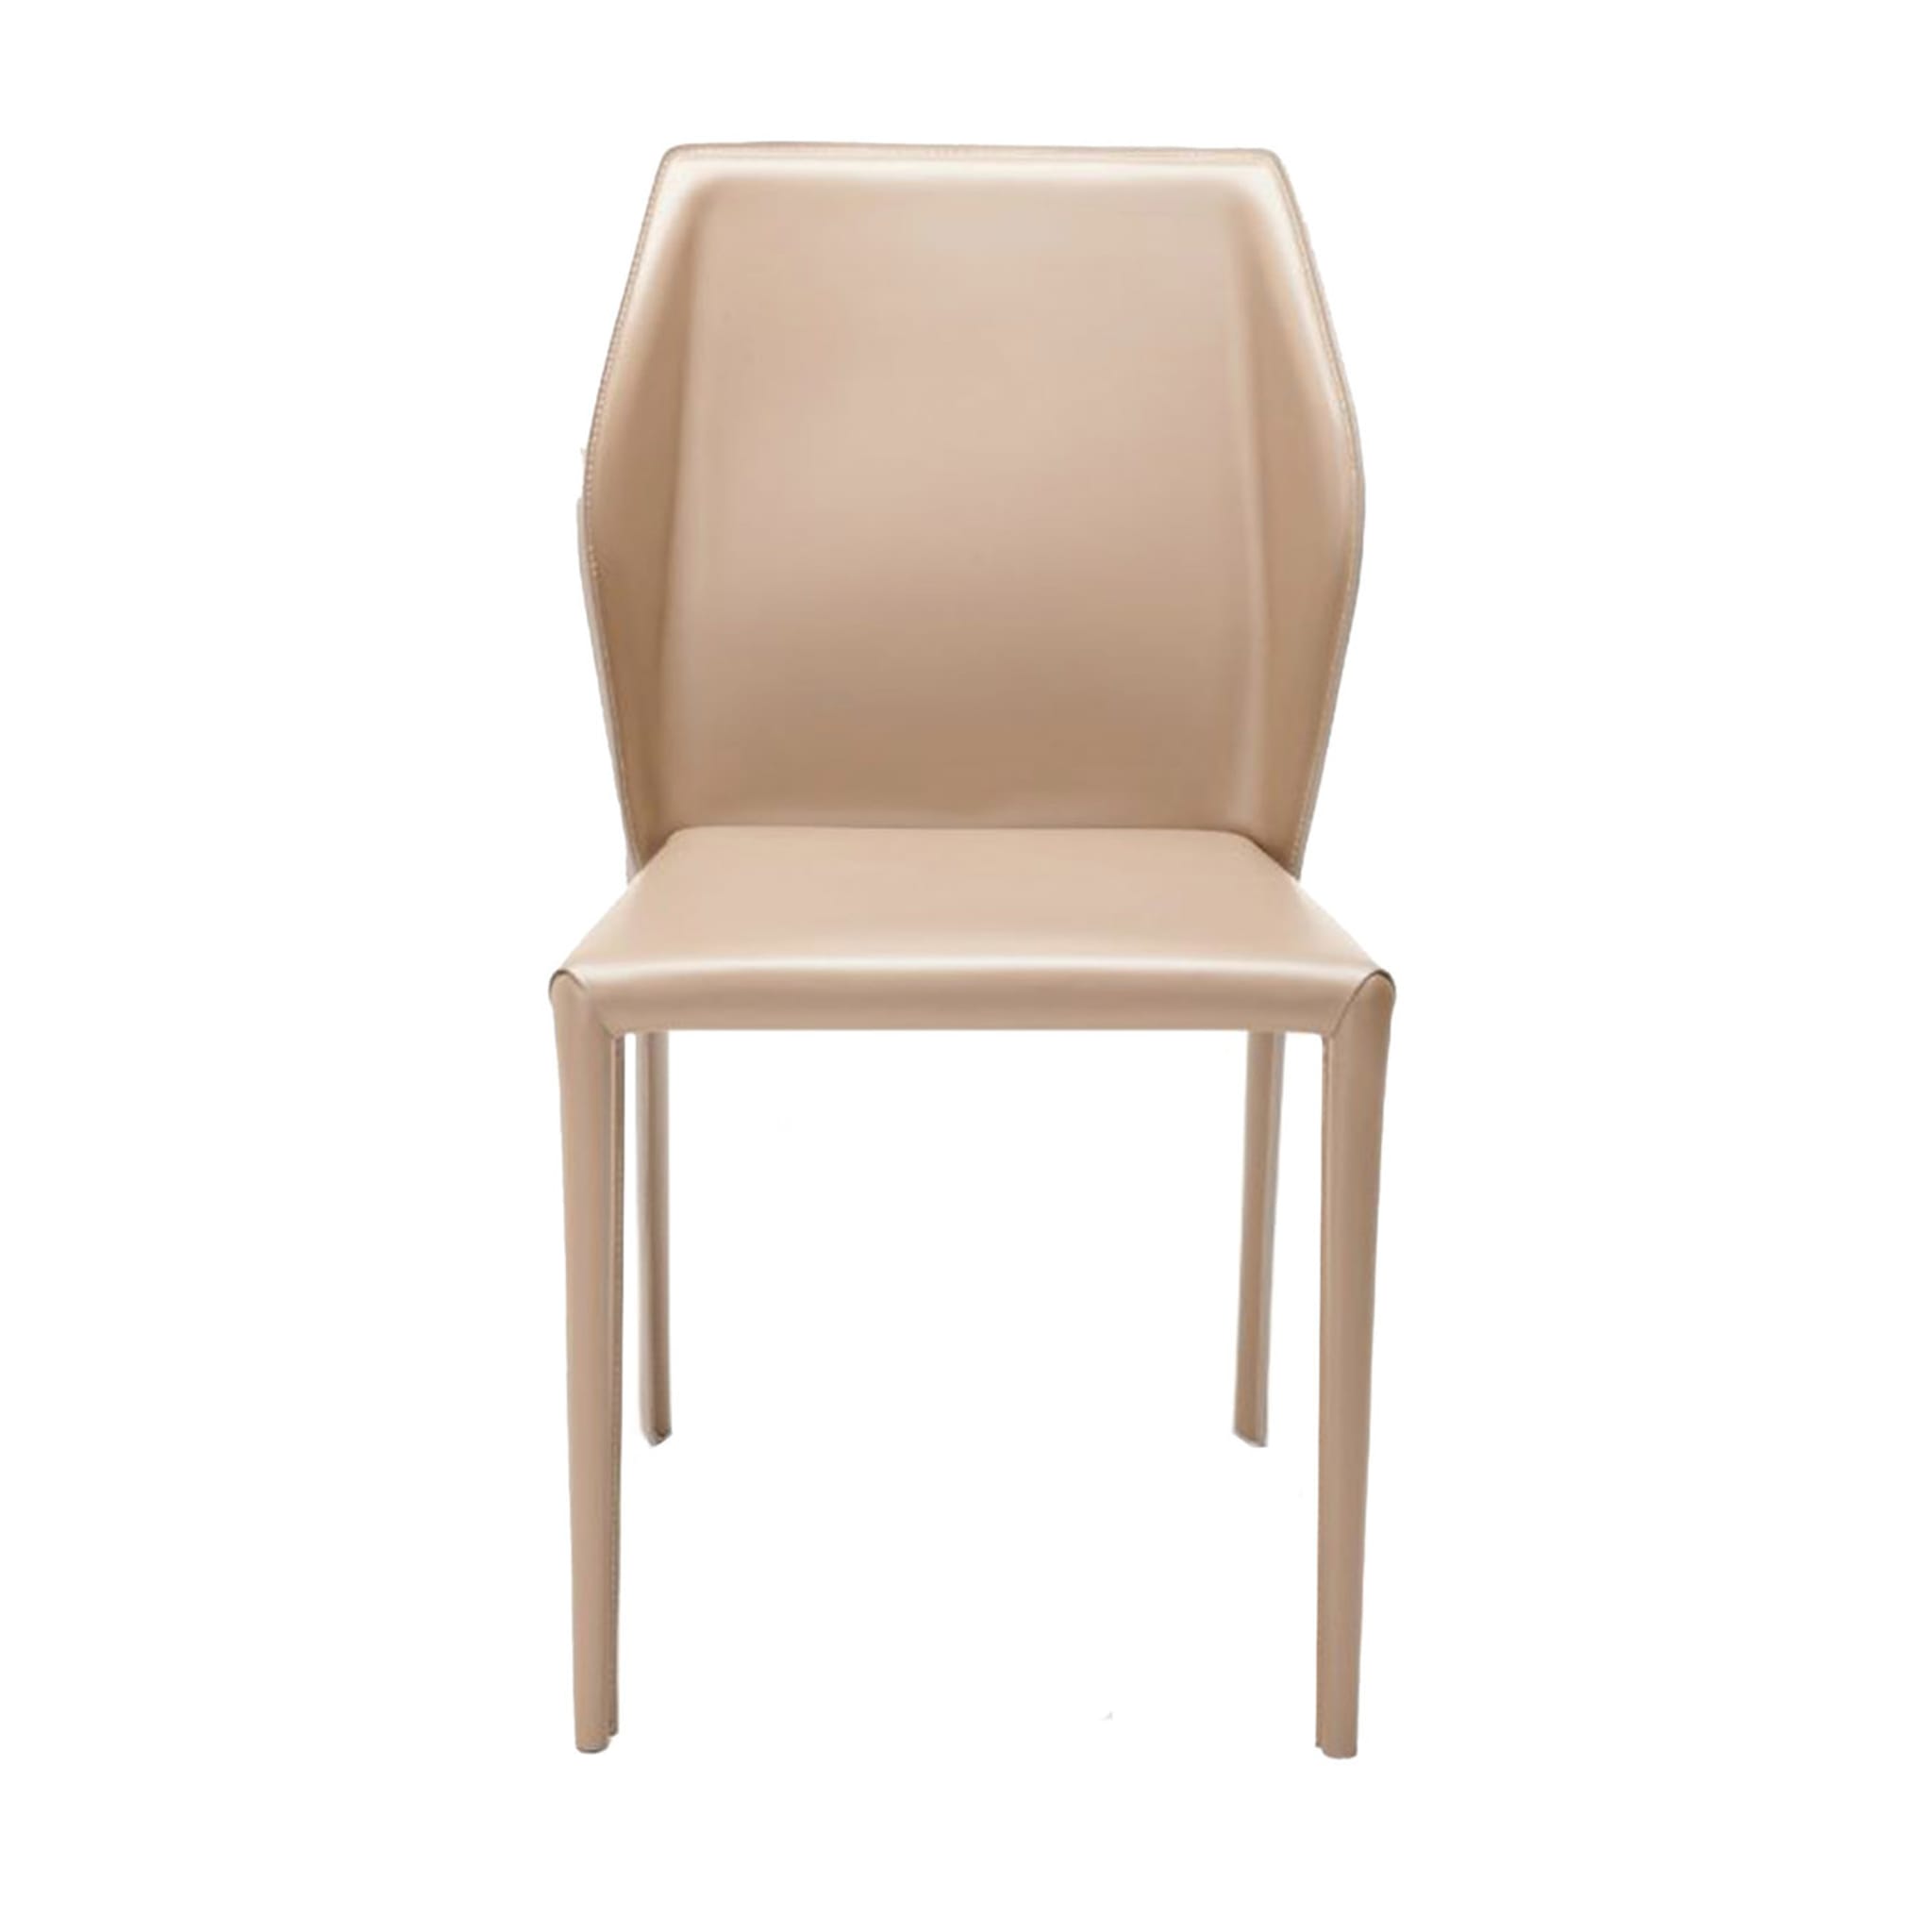 Set of 2 Fold Chair  - Main view